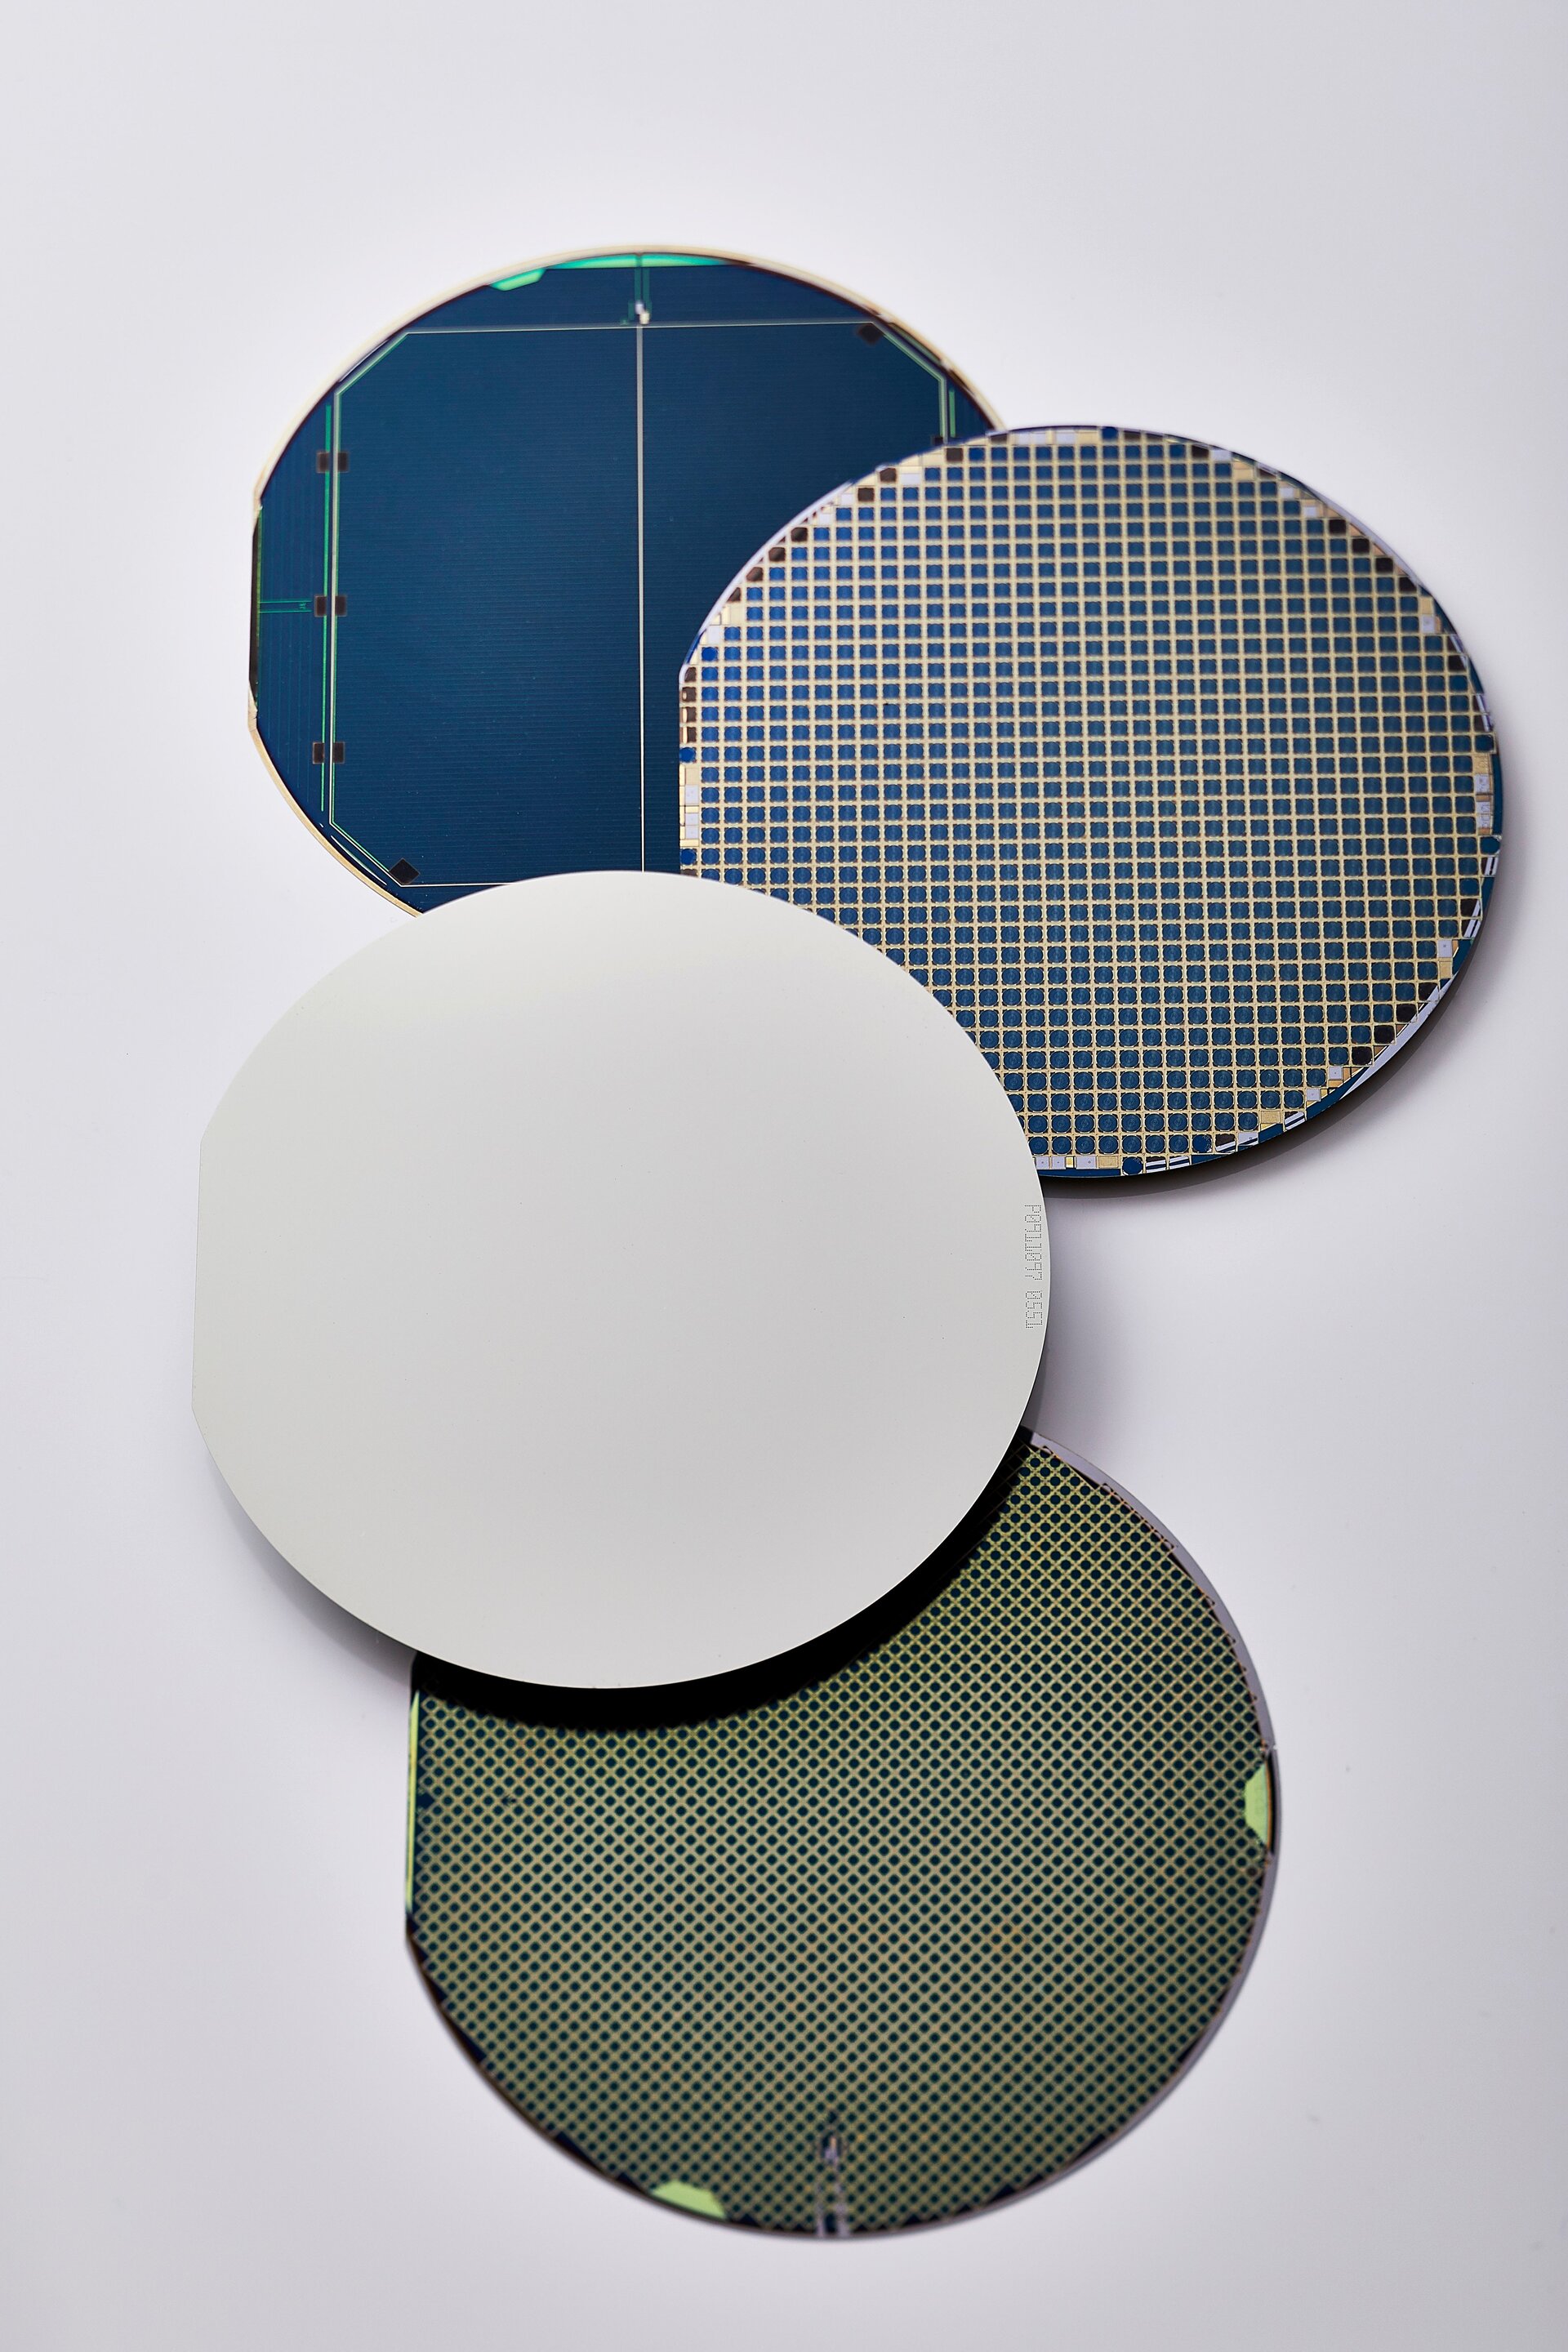 Germanium wafers before and after cell manufacturing for different applications